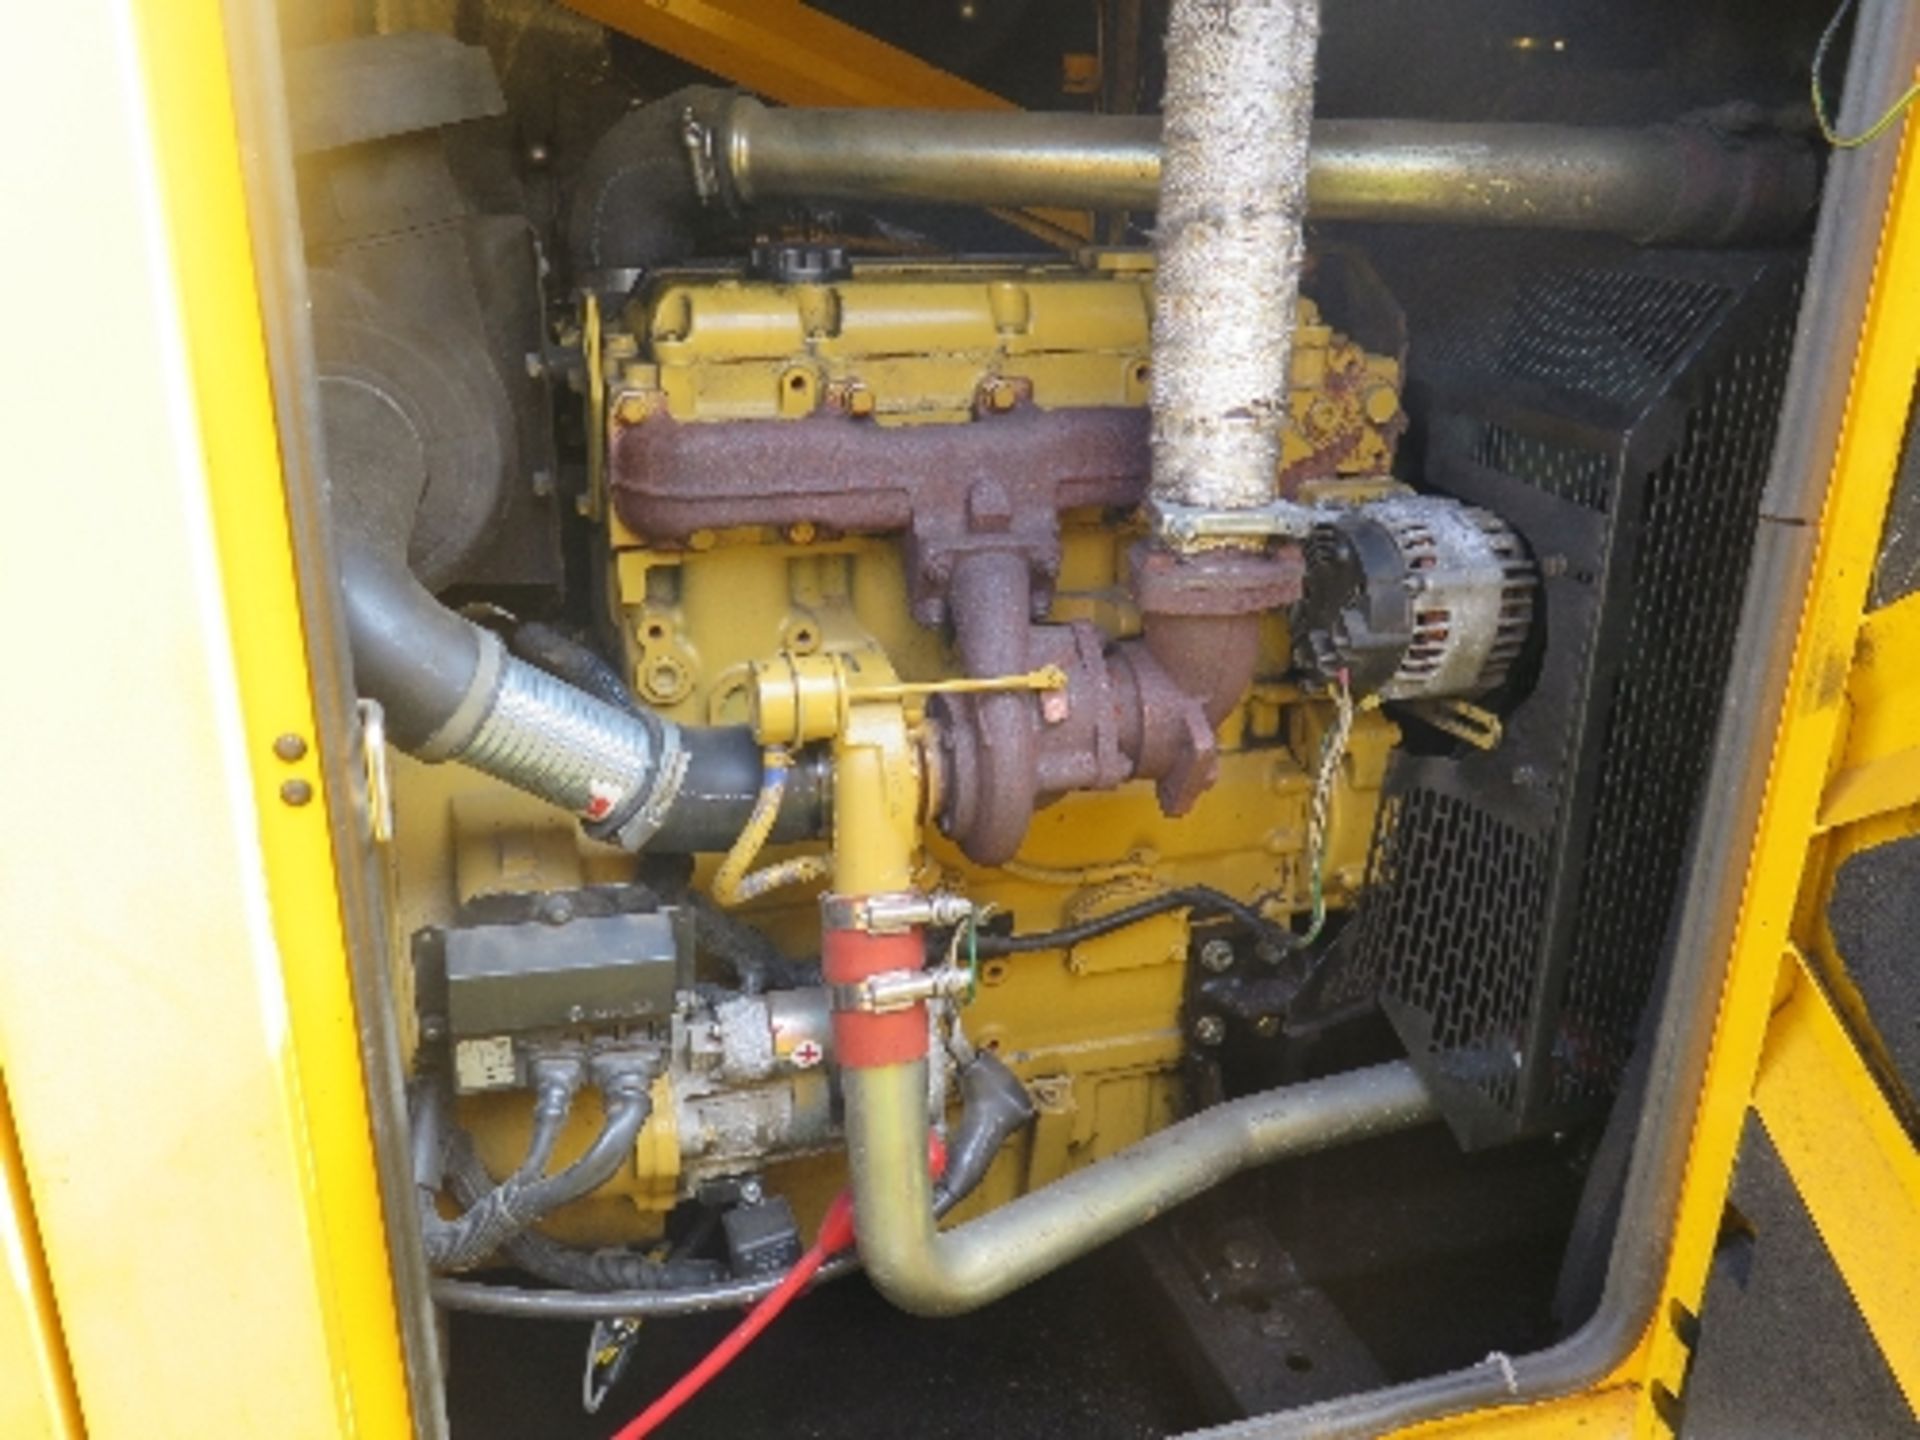 Caterpillar XQE100 generator 15066 hrs 158066
PERKINS - RUNS AND MAKES POWER
ALL LOTS are SOLD - Image 7 of 7